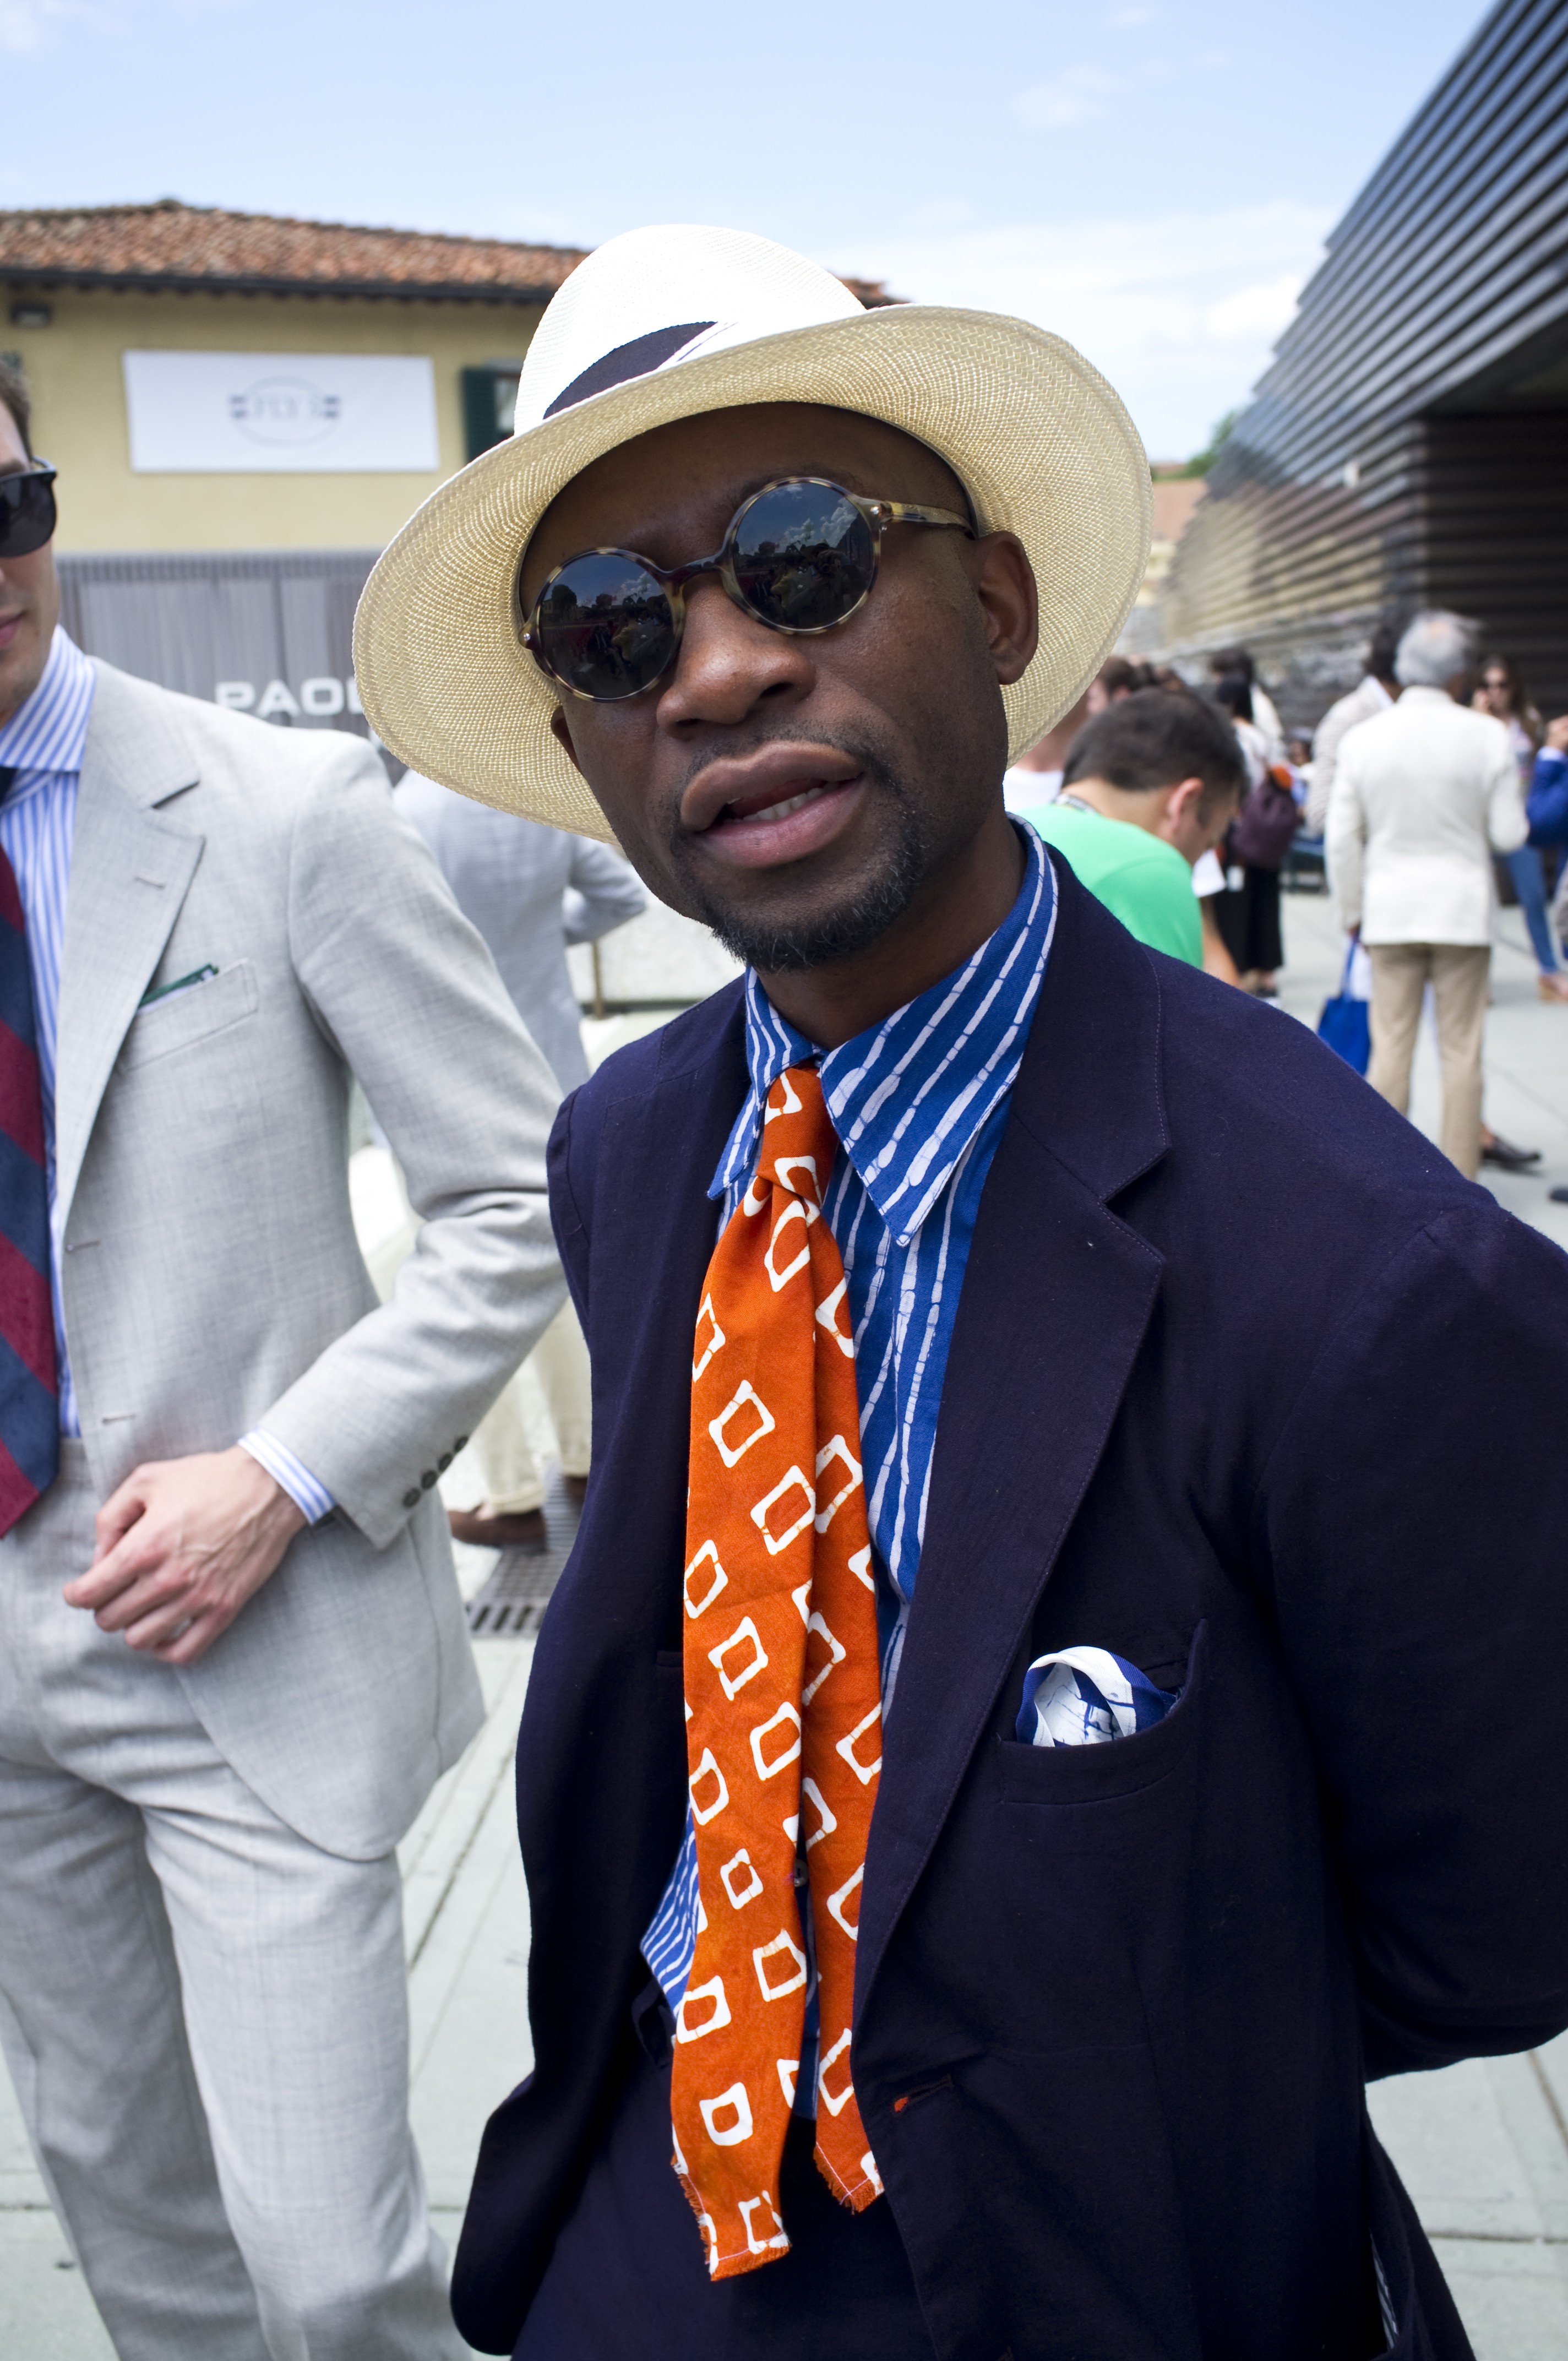 Streetstyle: The Best Pictures From Pitti Uomo 88 | Styleforum